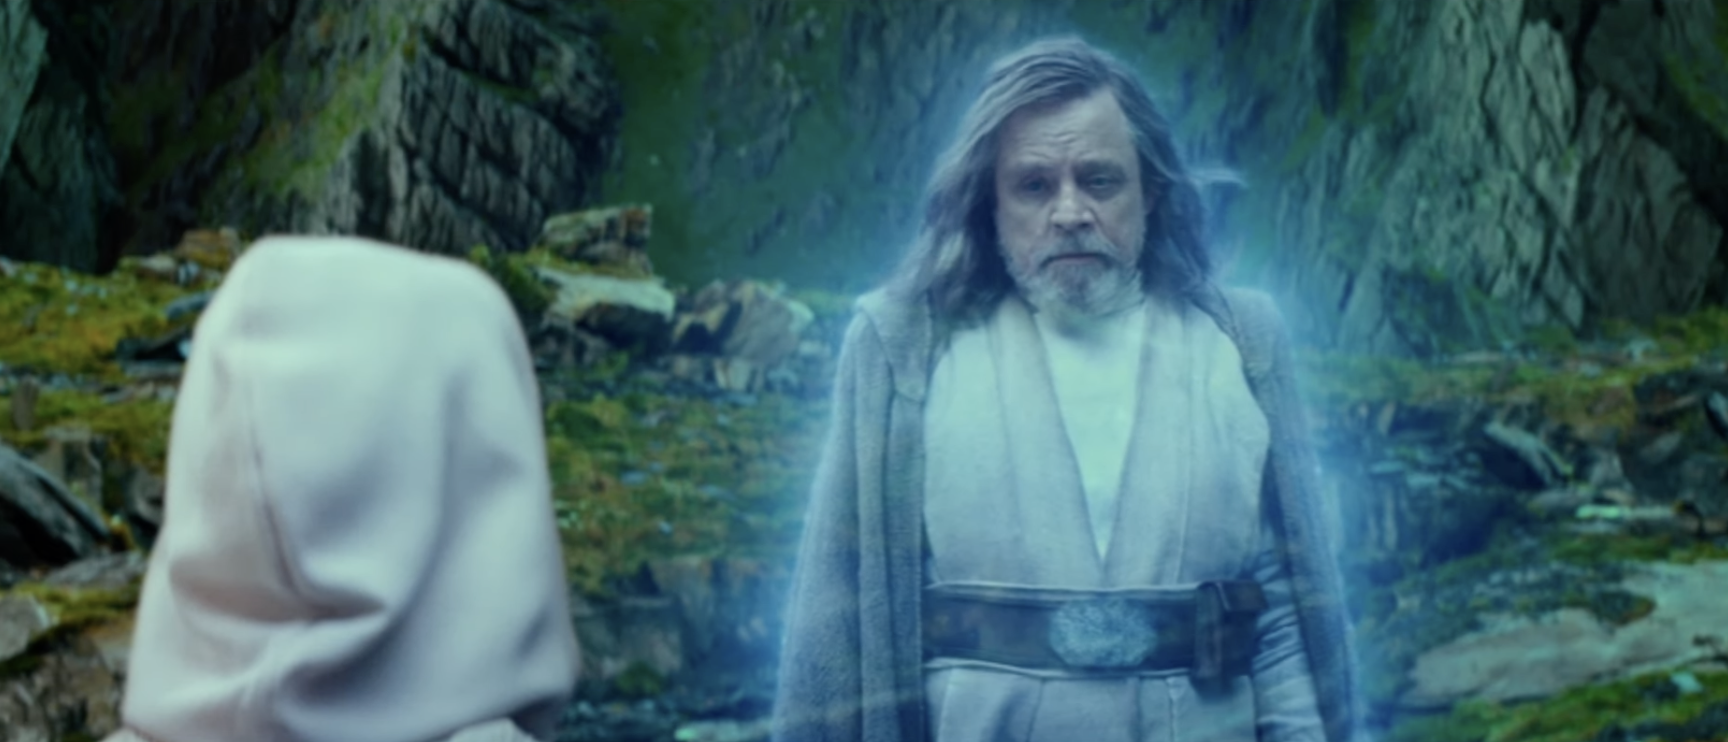 Character Luke Skywalker appears as a force ghost facing character Rey outdoors